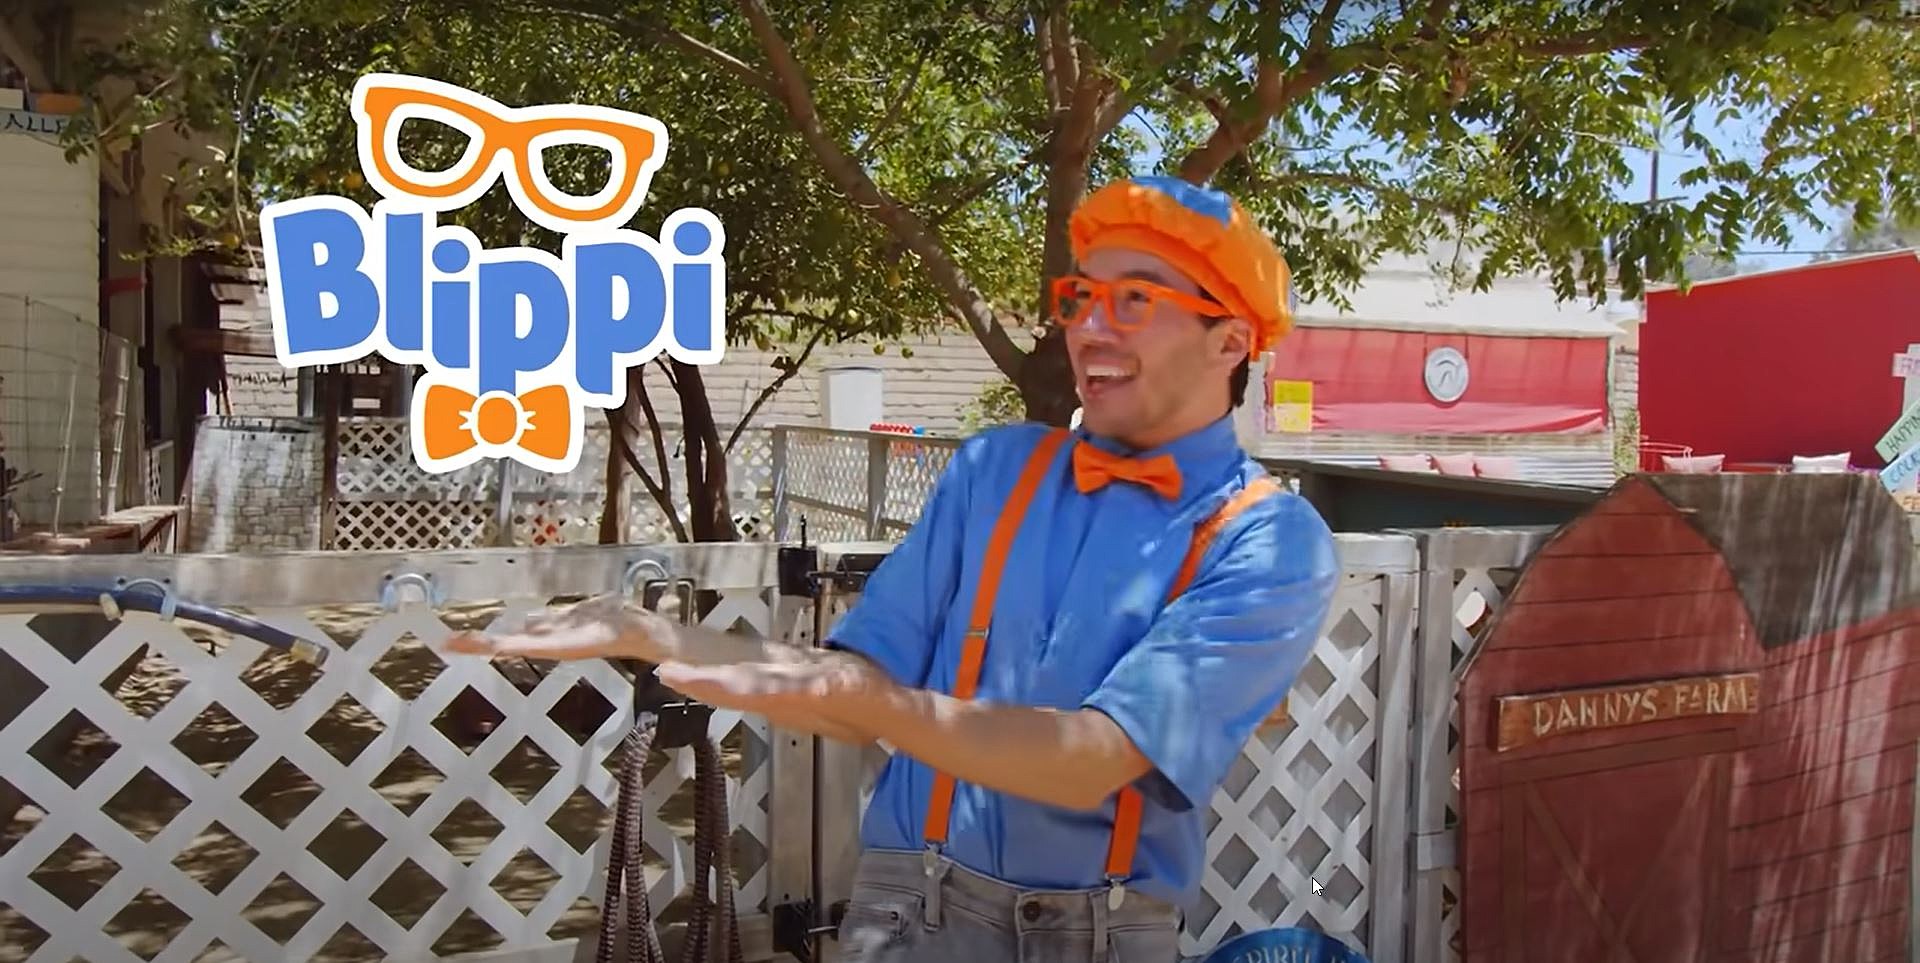 Blippi The Musical' Announces 2022 Tour Stop in Evansville